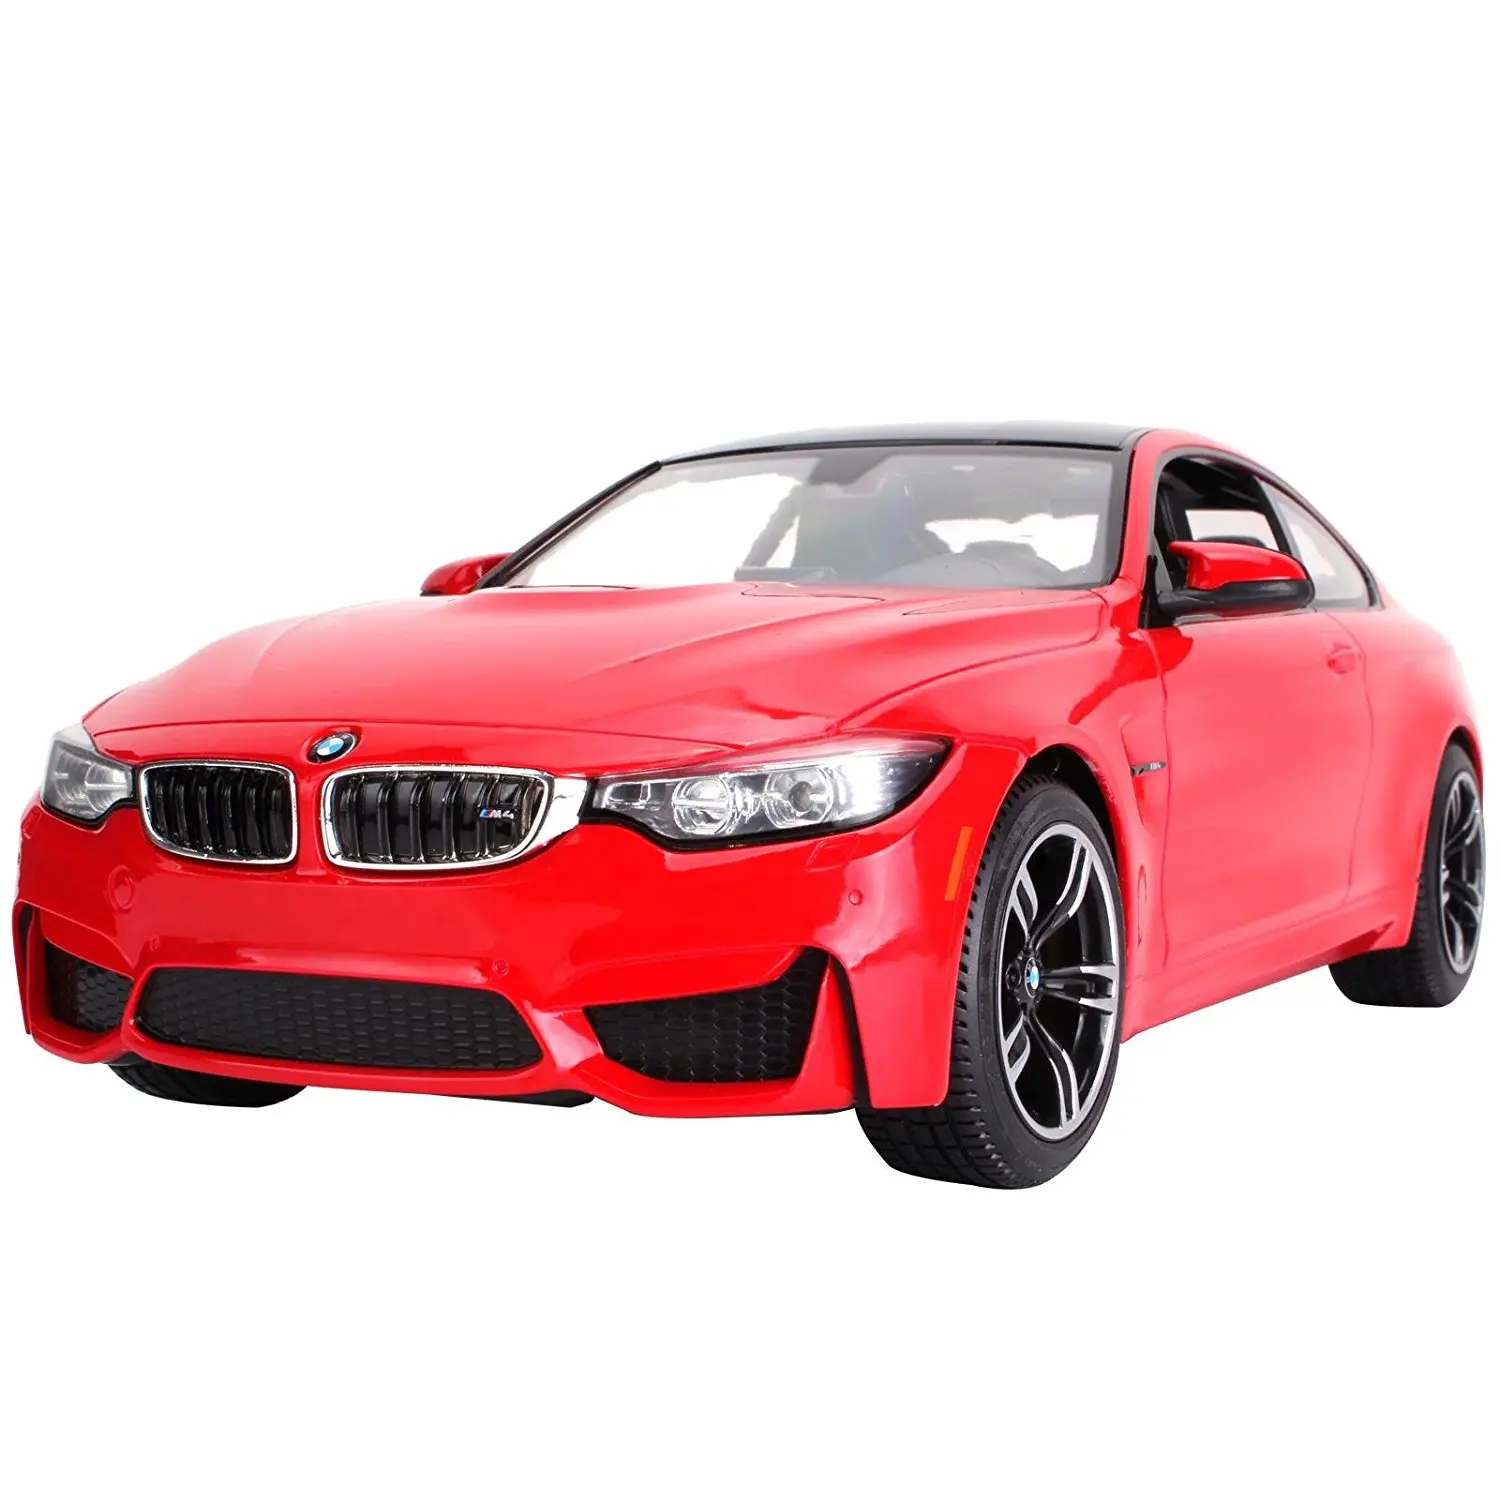 Buy Licensed Rastar R C Remote Control Car Vehicle 1 14 Bmw M4 Coupe Red Car Model Kid Child Toy In Cheap Price On Alibaba Com